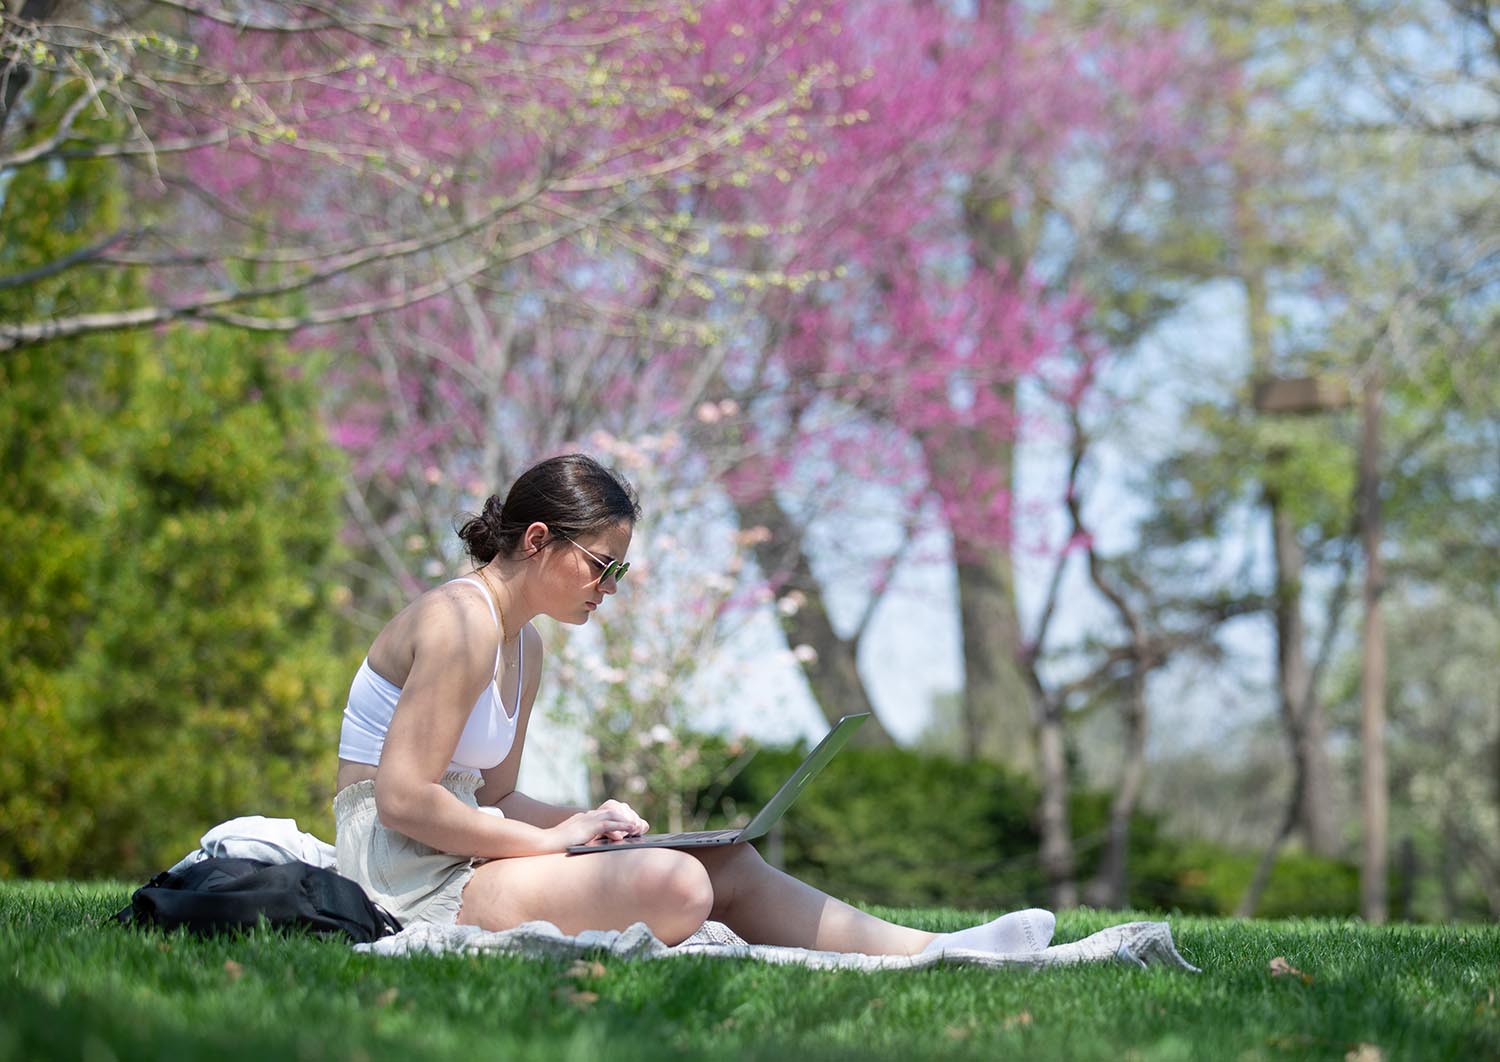 Student sitting on the grass studying on a sunny spring day